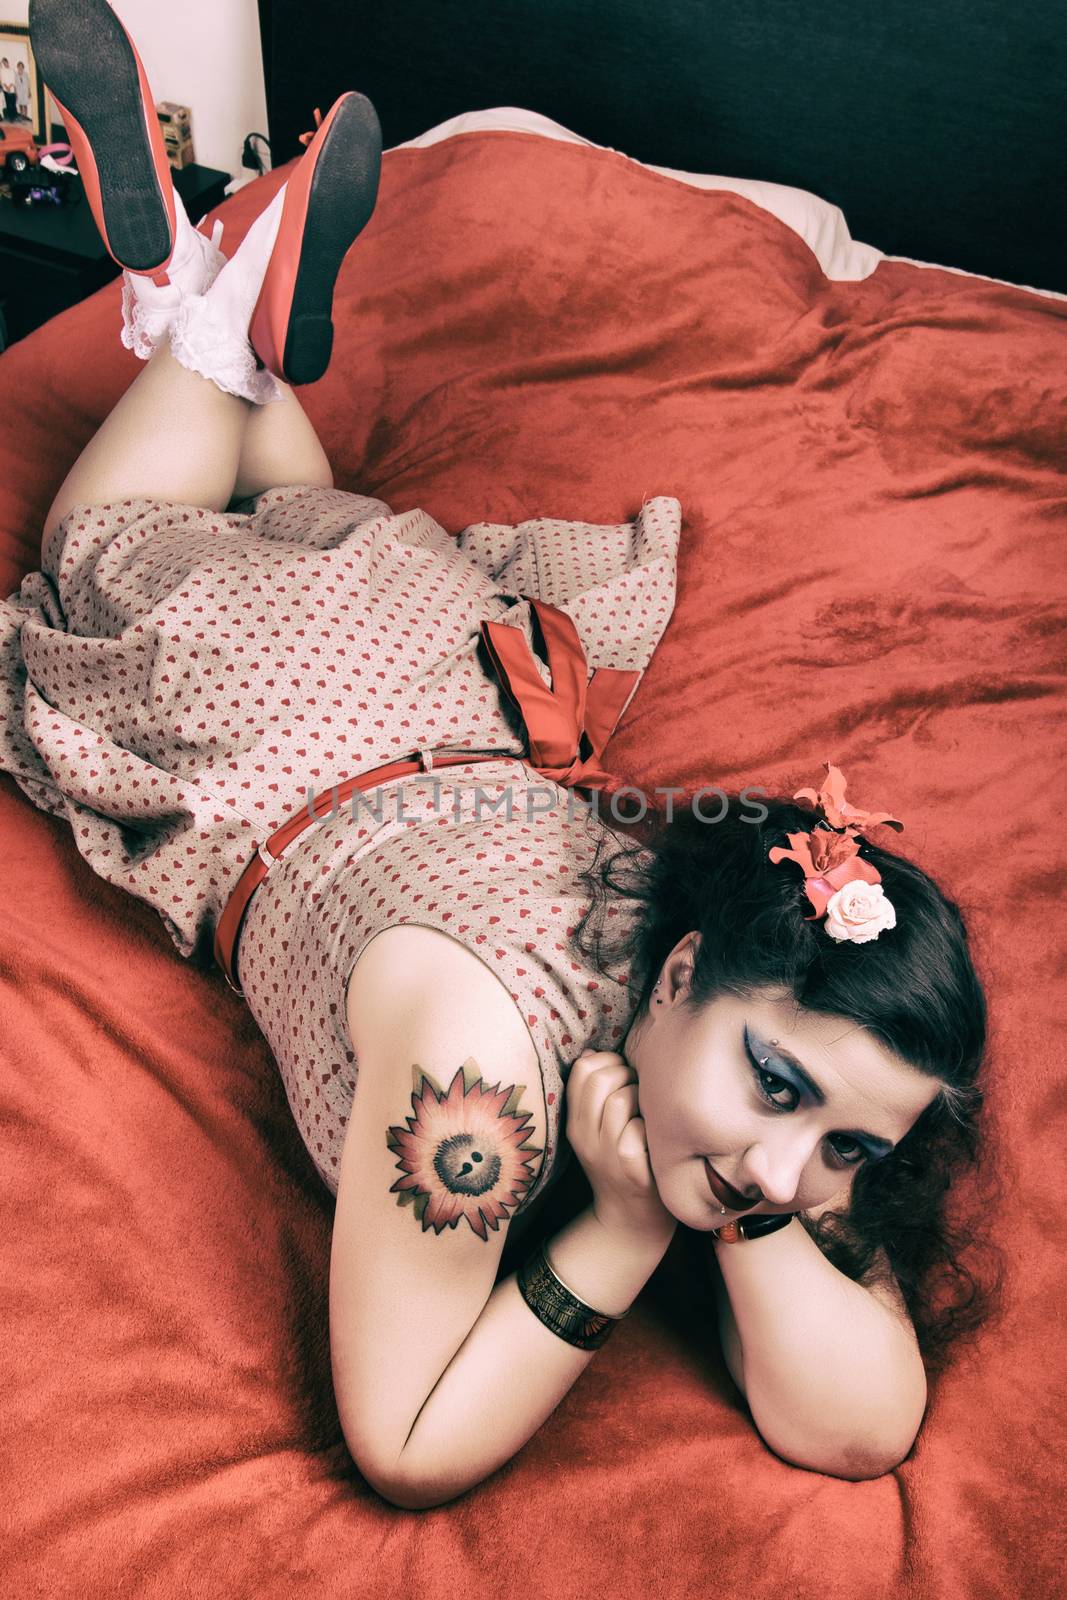 Pinup girl posing on a red bed by membio